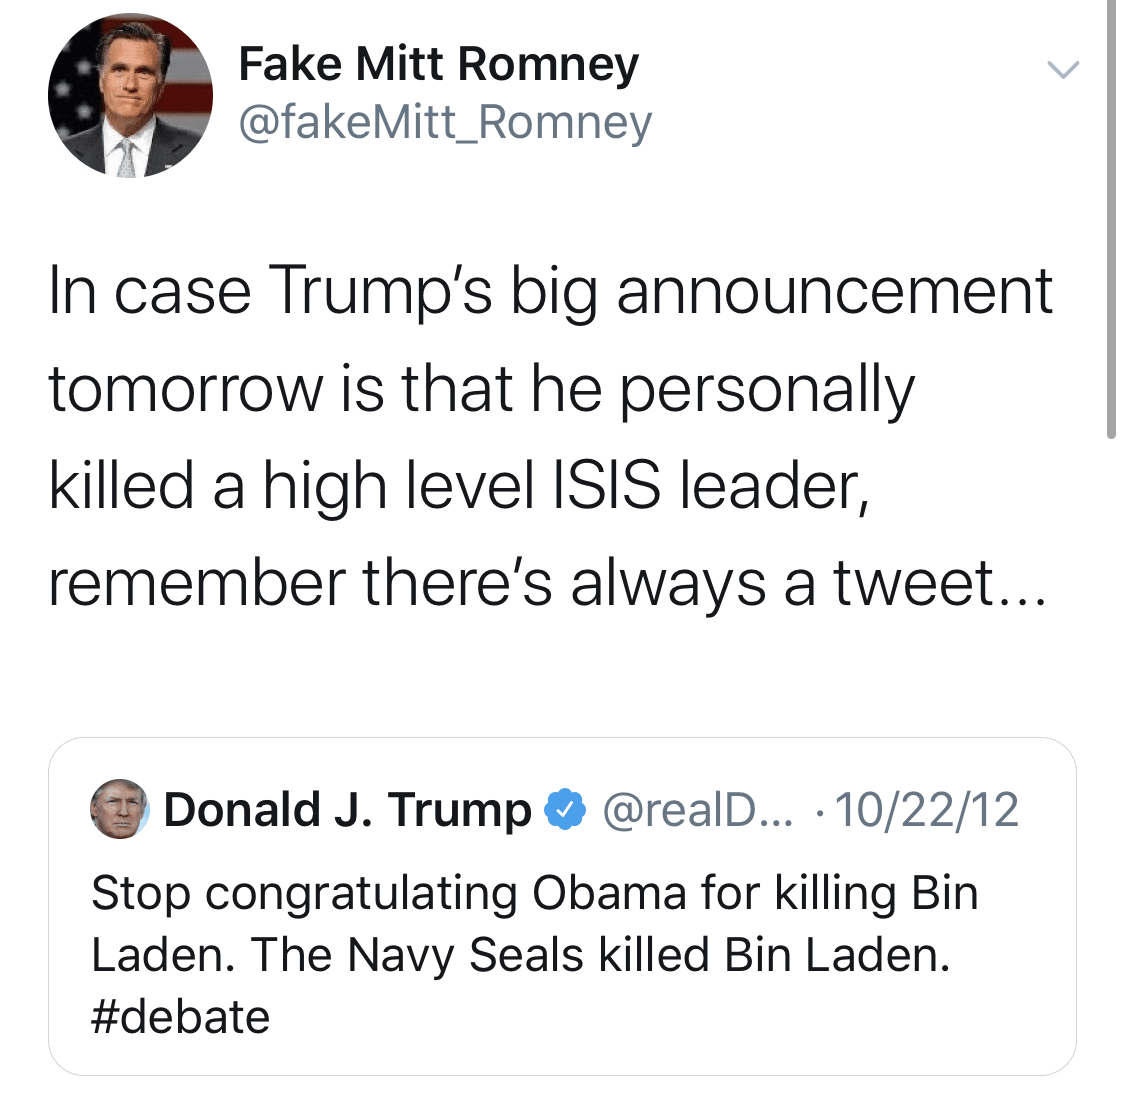 political political-memes political text: Fake Mitt Romney @fakeMitt_Romney In case Trump's big announcement tomorrow is that he personally killed a high level ISIS leader, remember there's always a tweet... e @reaID... • 10/22/12 Donald J. Trump Stop congratulating Obama for killing Bin Laden. The Navy Seals killed Bin Laden. #debate 